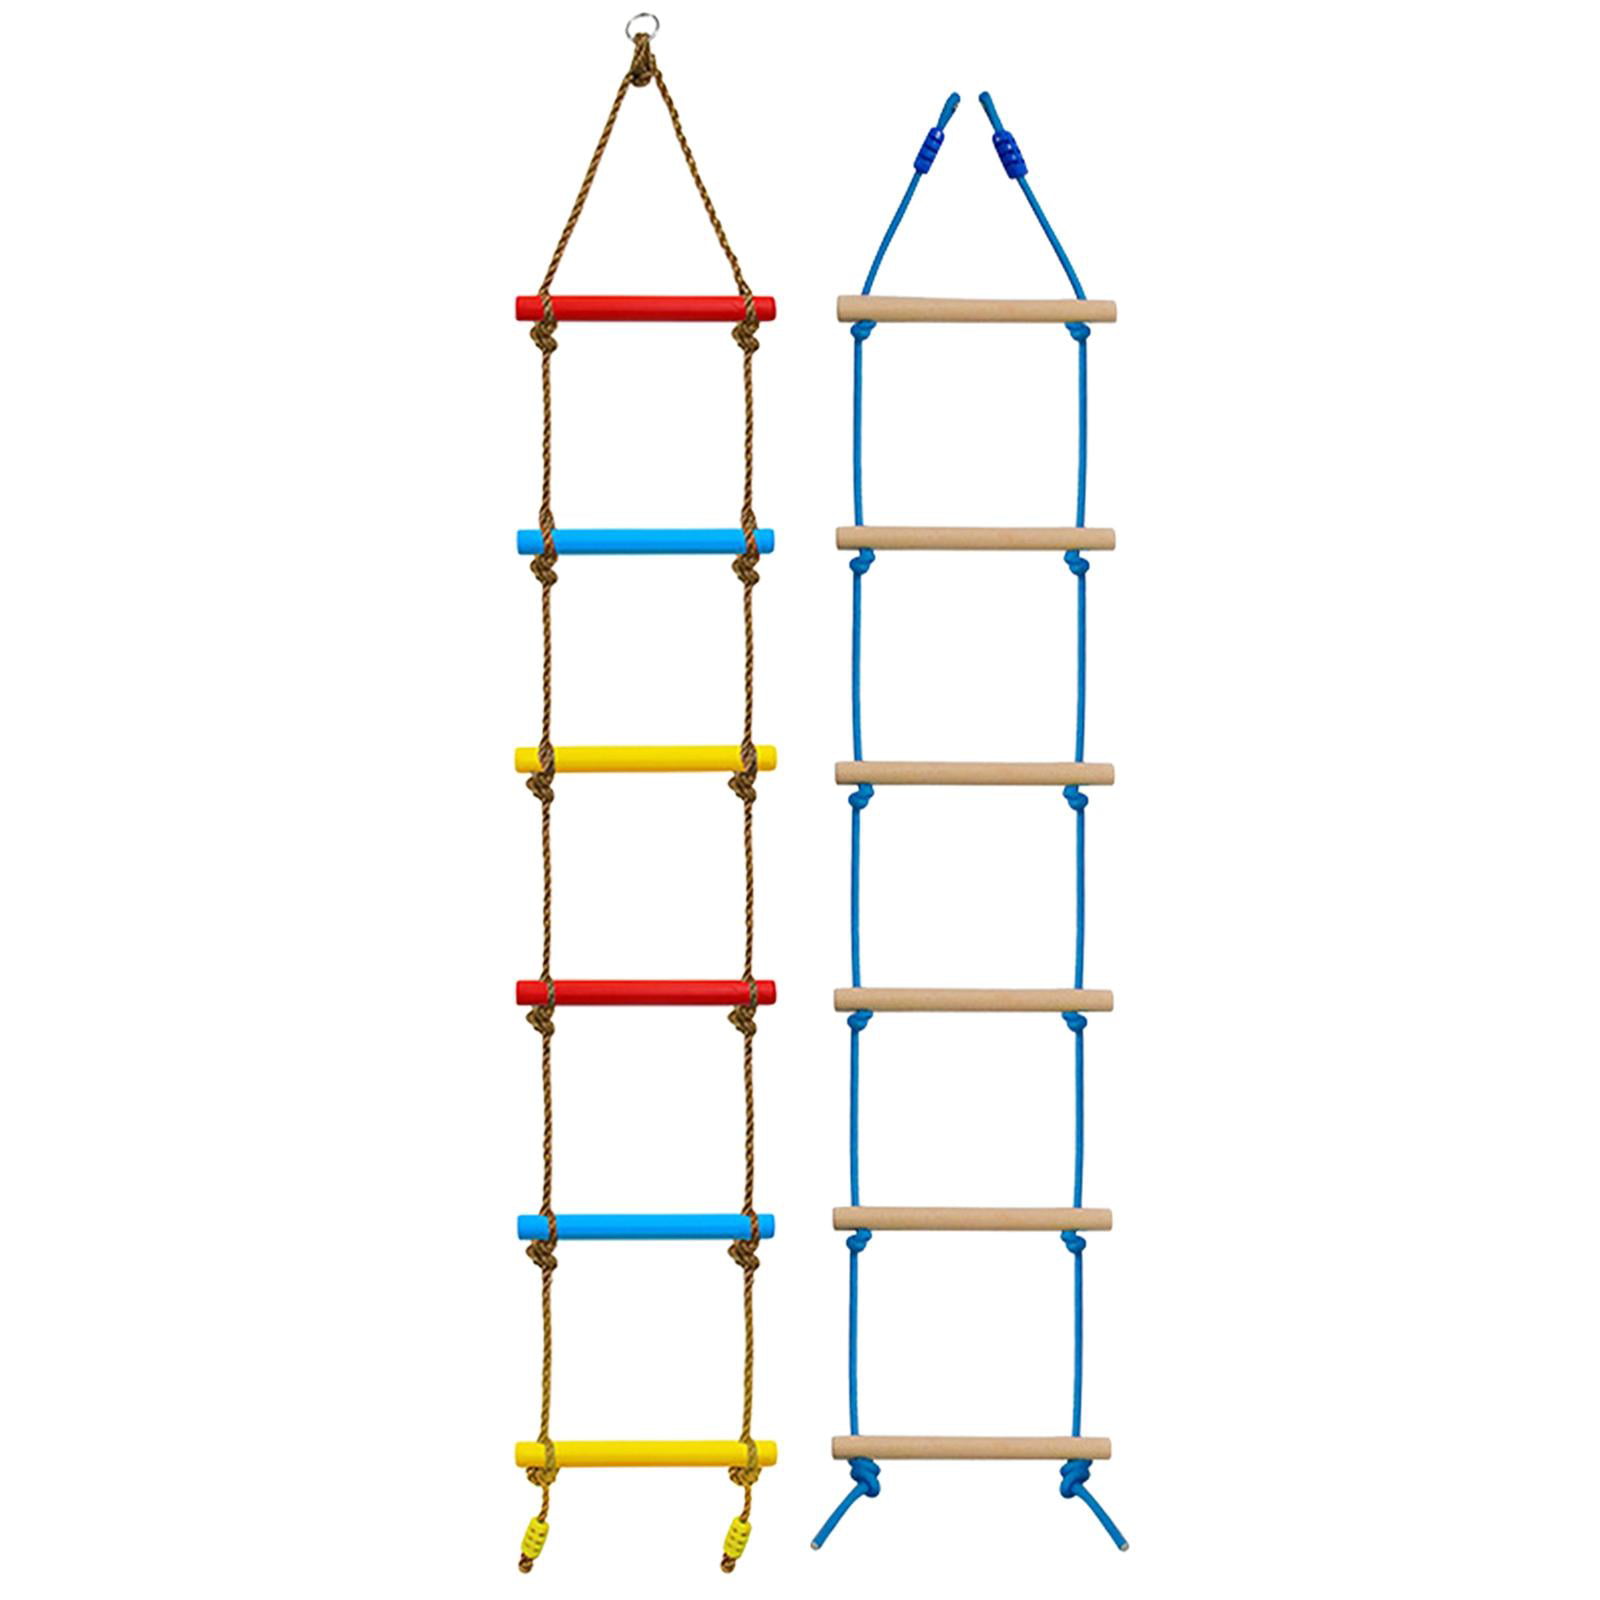 KIDS TOY WOODEN ROPE LADDER SWING 6 RUNGS FOR BUNK BEDTREE HOUSE OUTDOOR INDOOR 